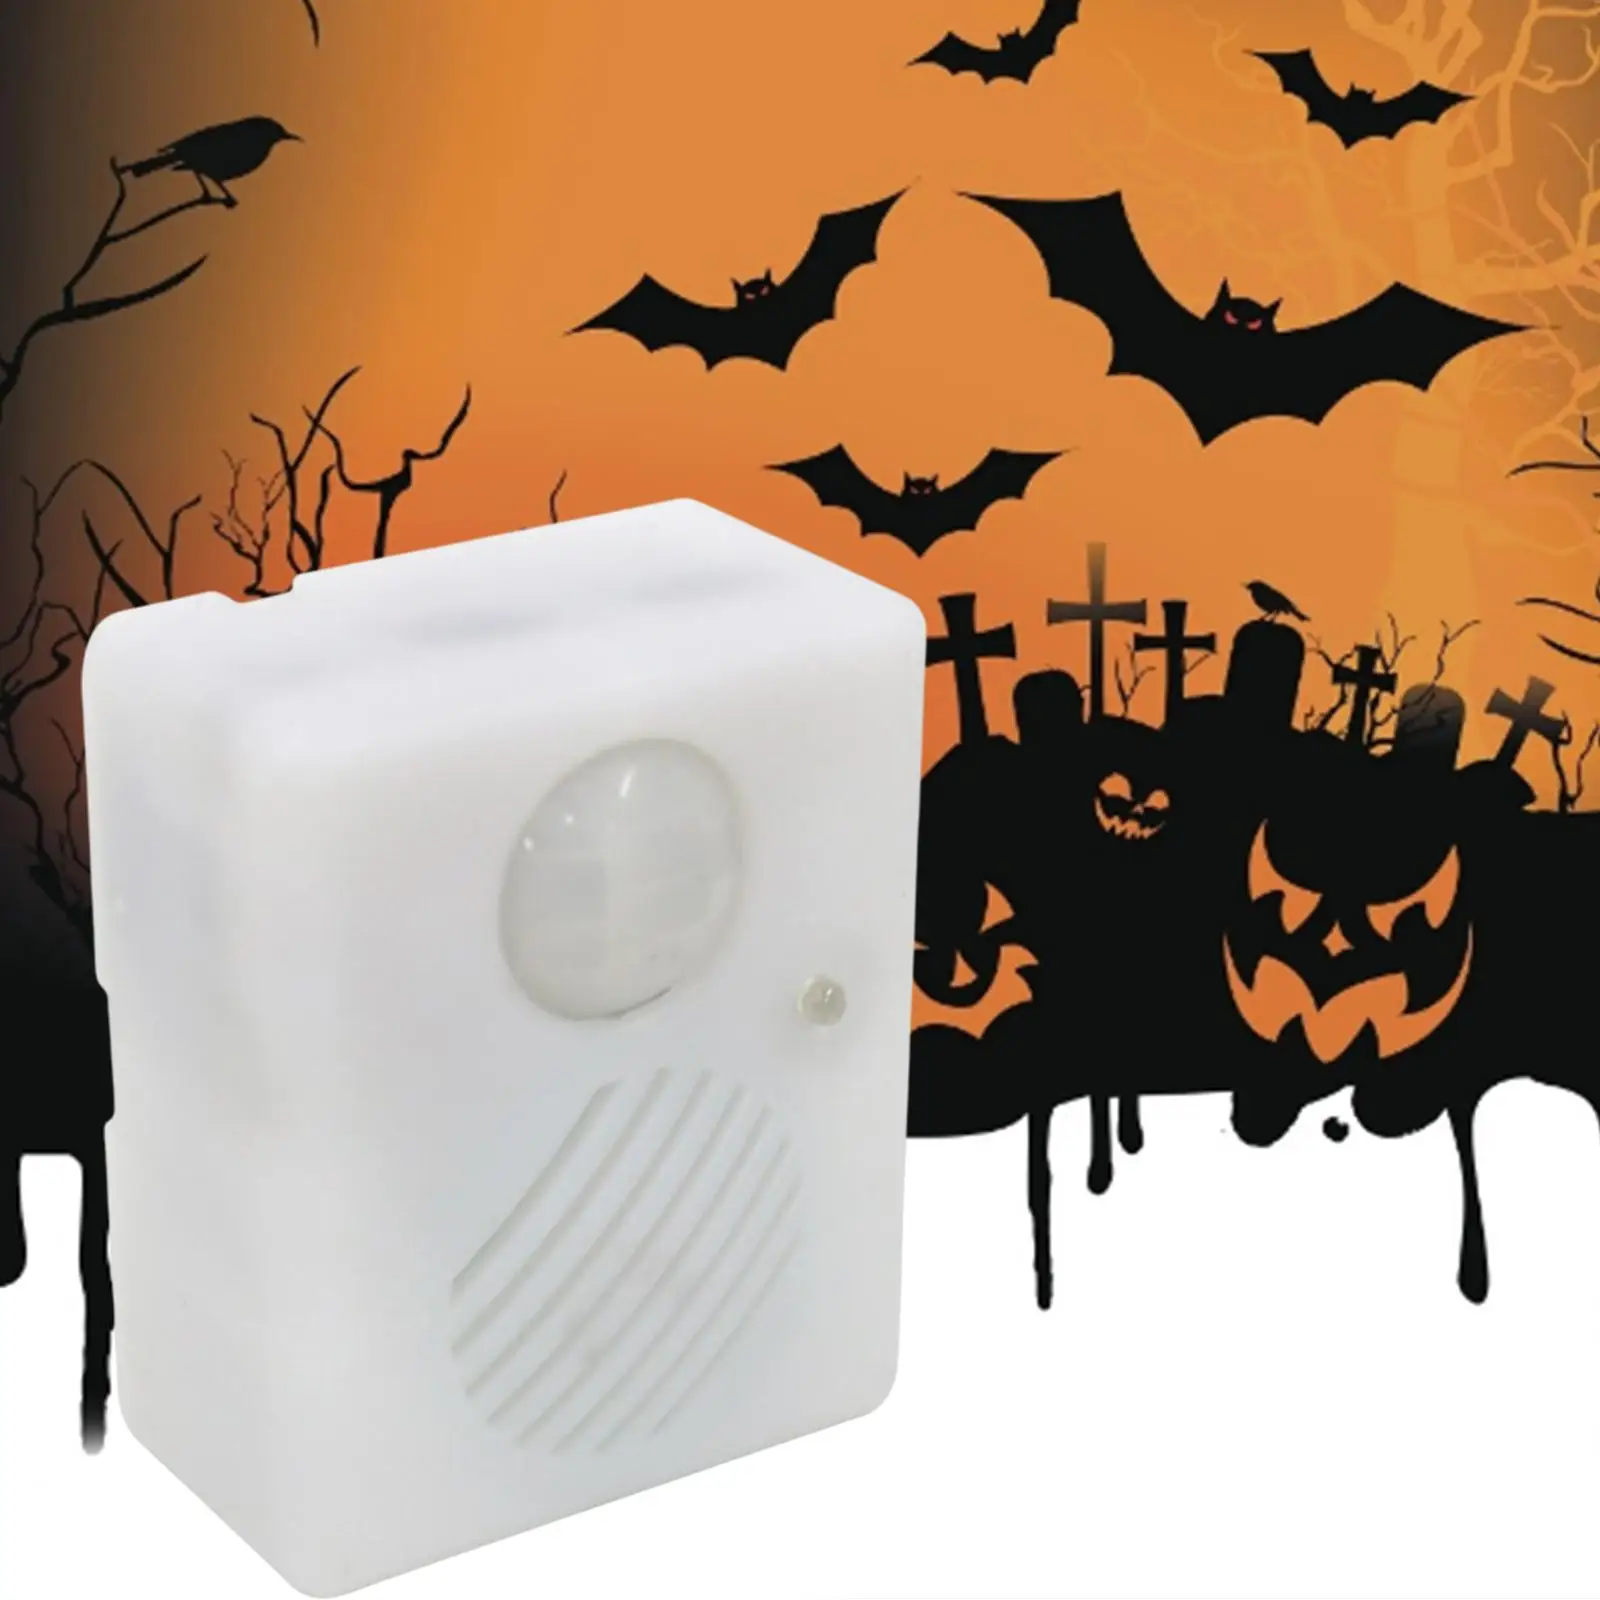 Halloween Sound Player Scary Noise Makers Horror Voice Recordable Screaming Speaker, 3.4cmx3.4cmx12.8cm